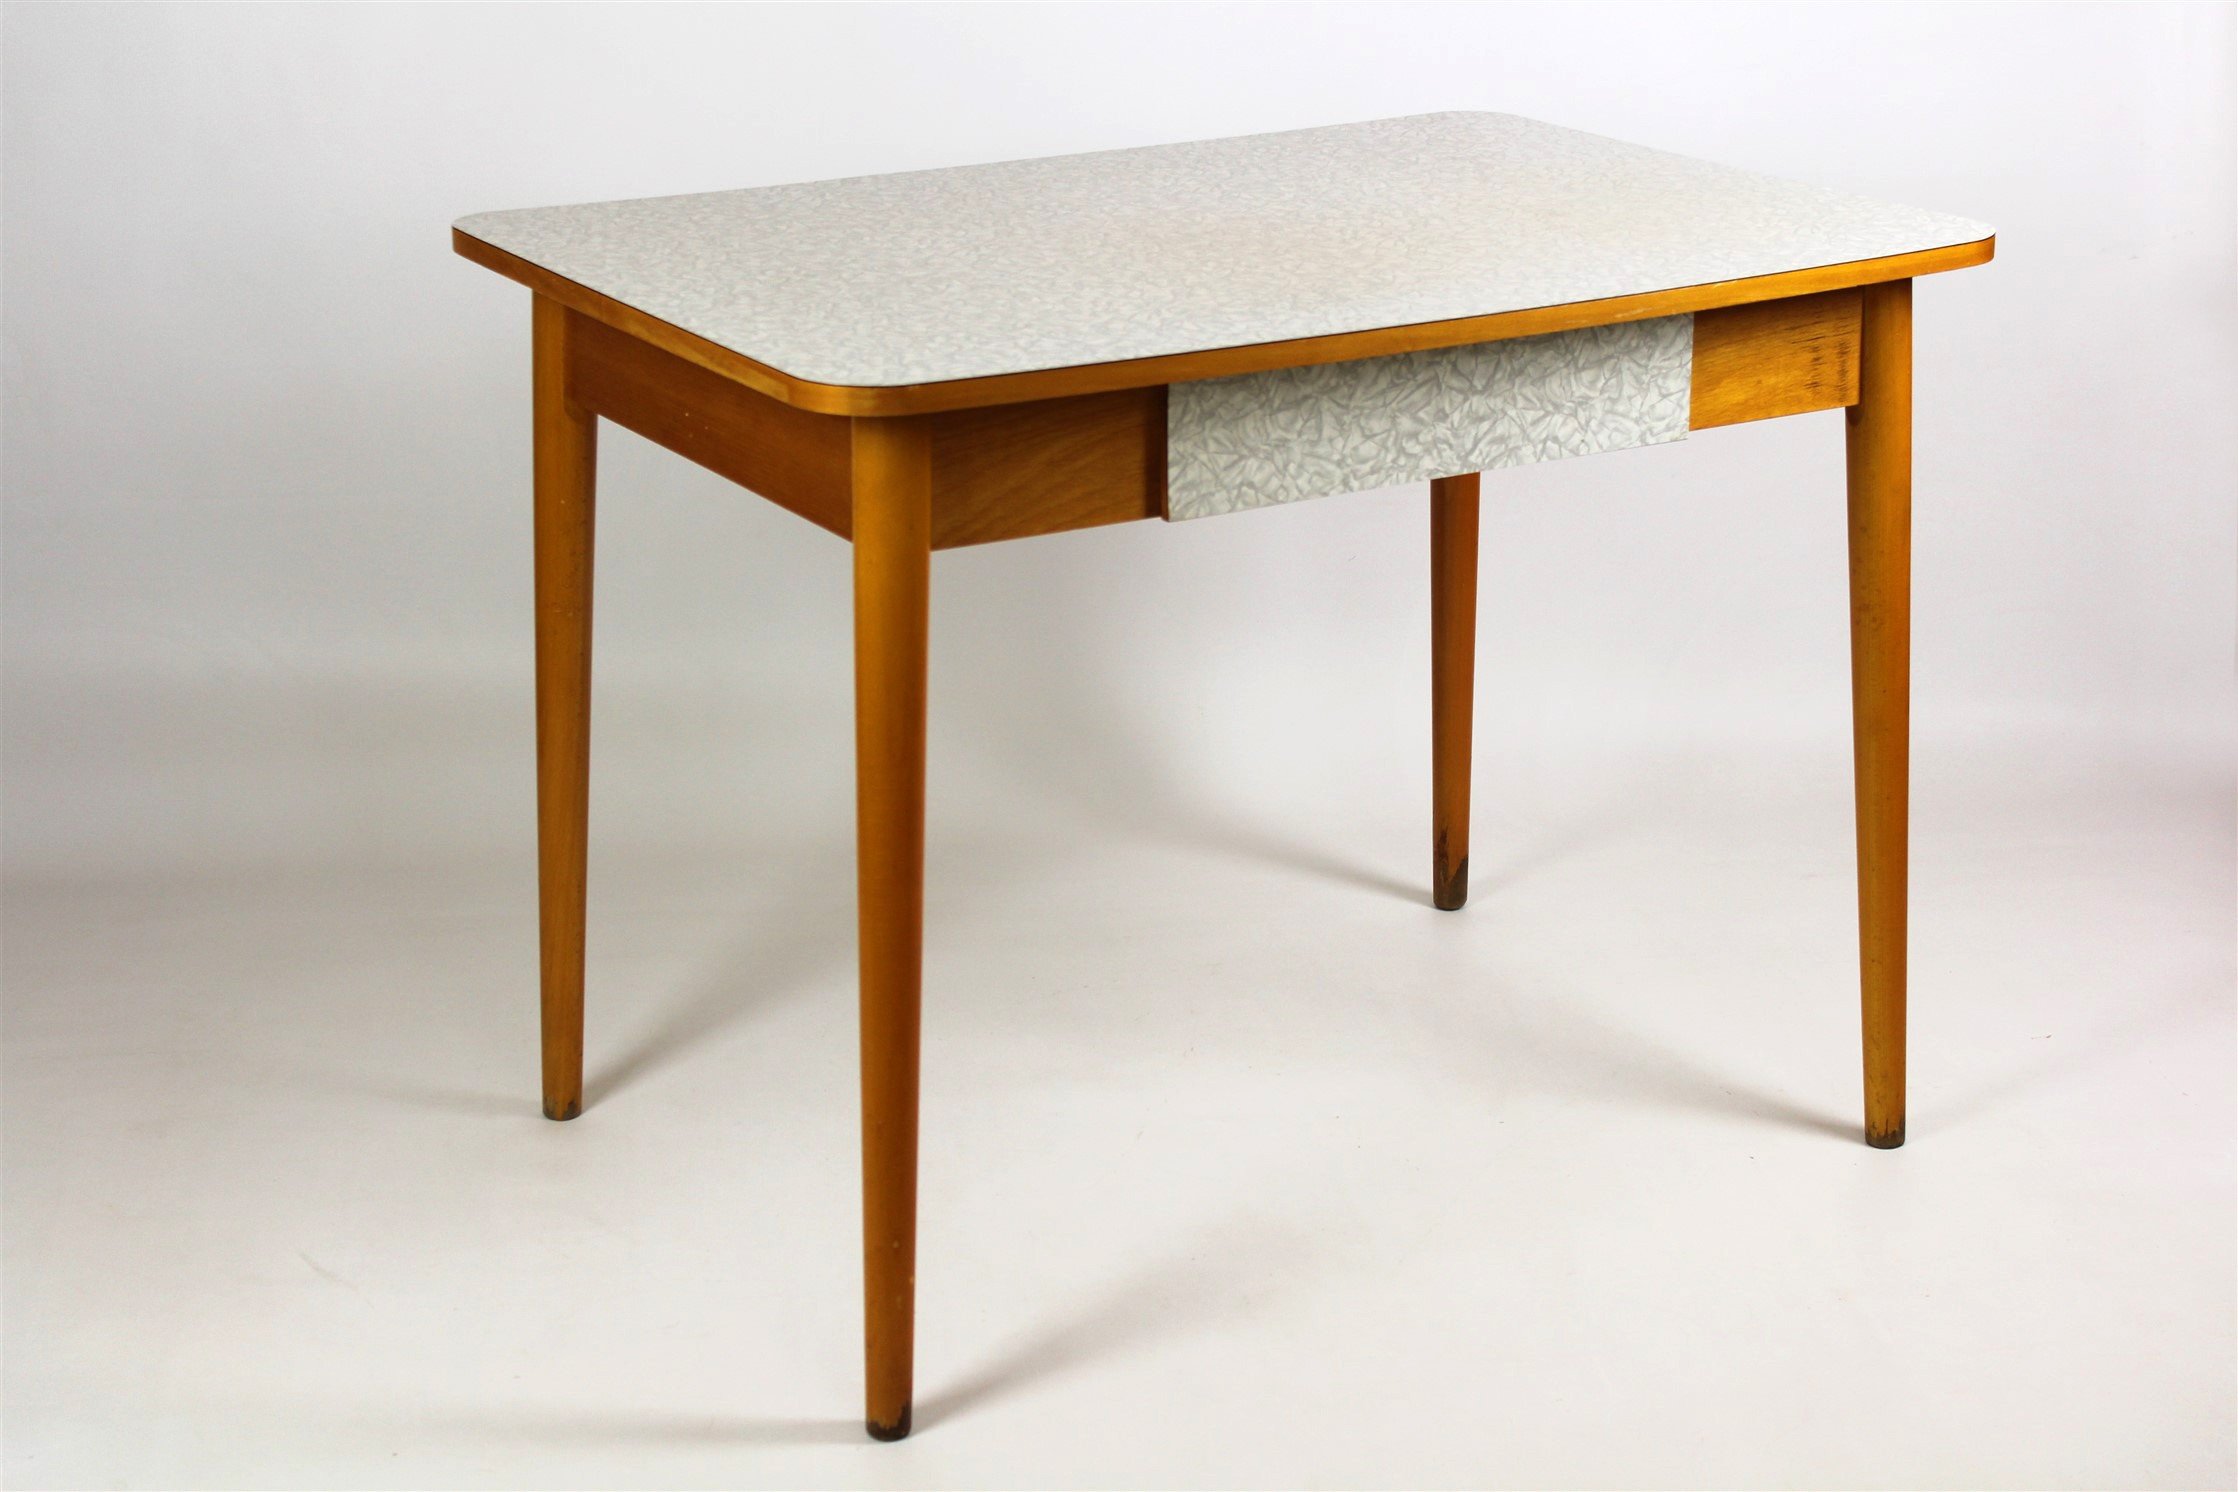 1960s formica kitchen table